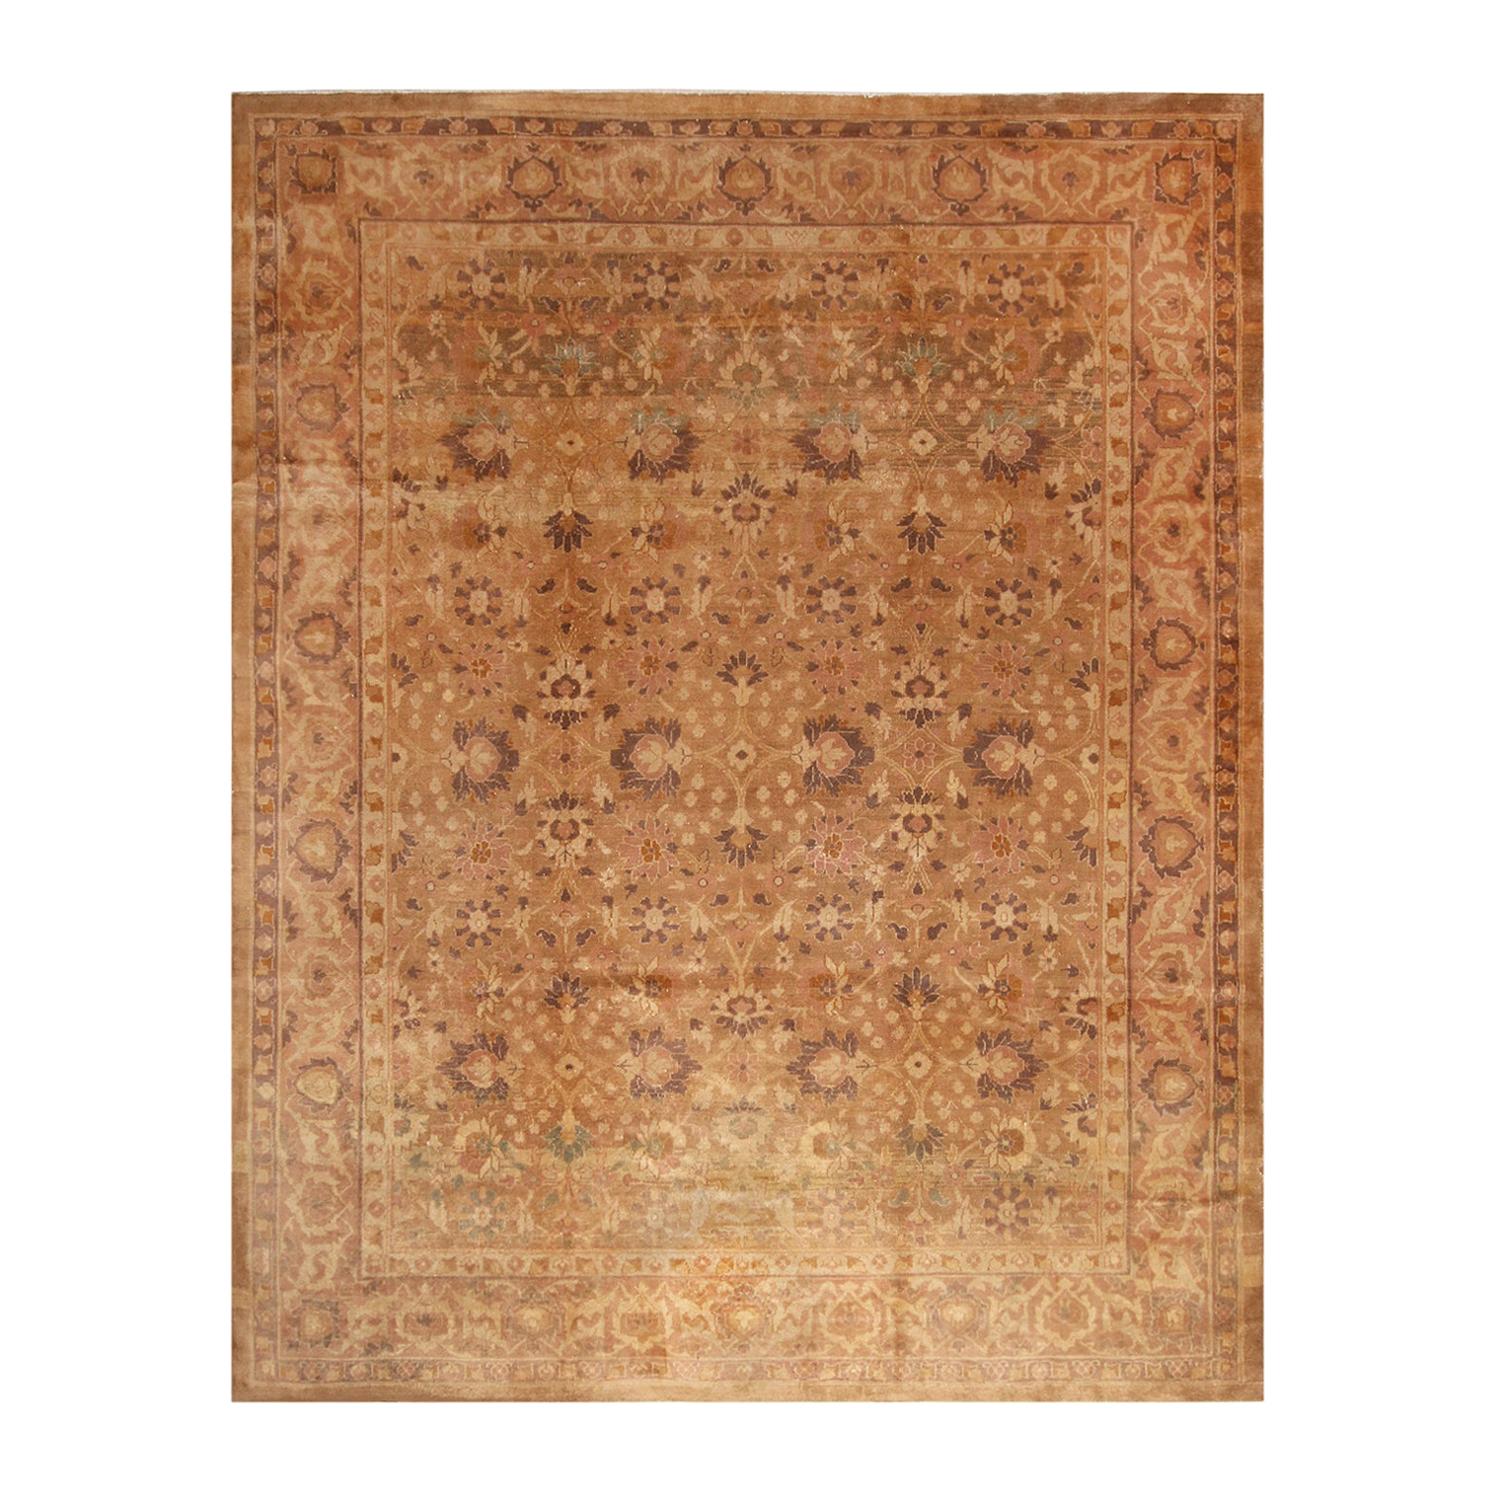 Antique Oushak Beige-Brown and Peach Wool Floral Rug